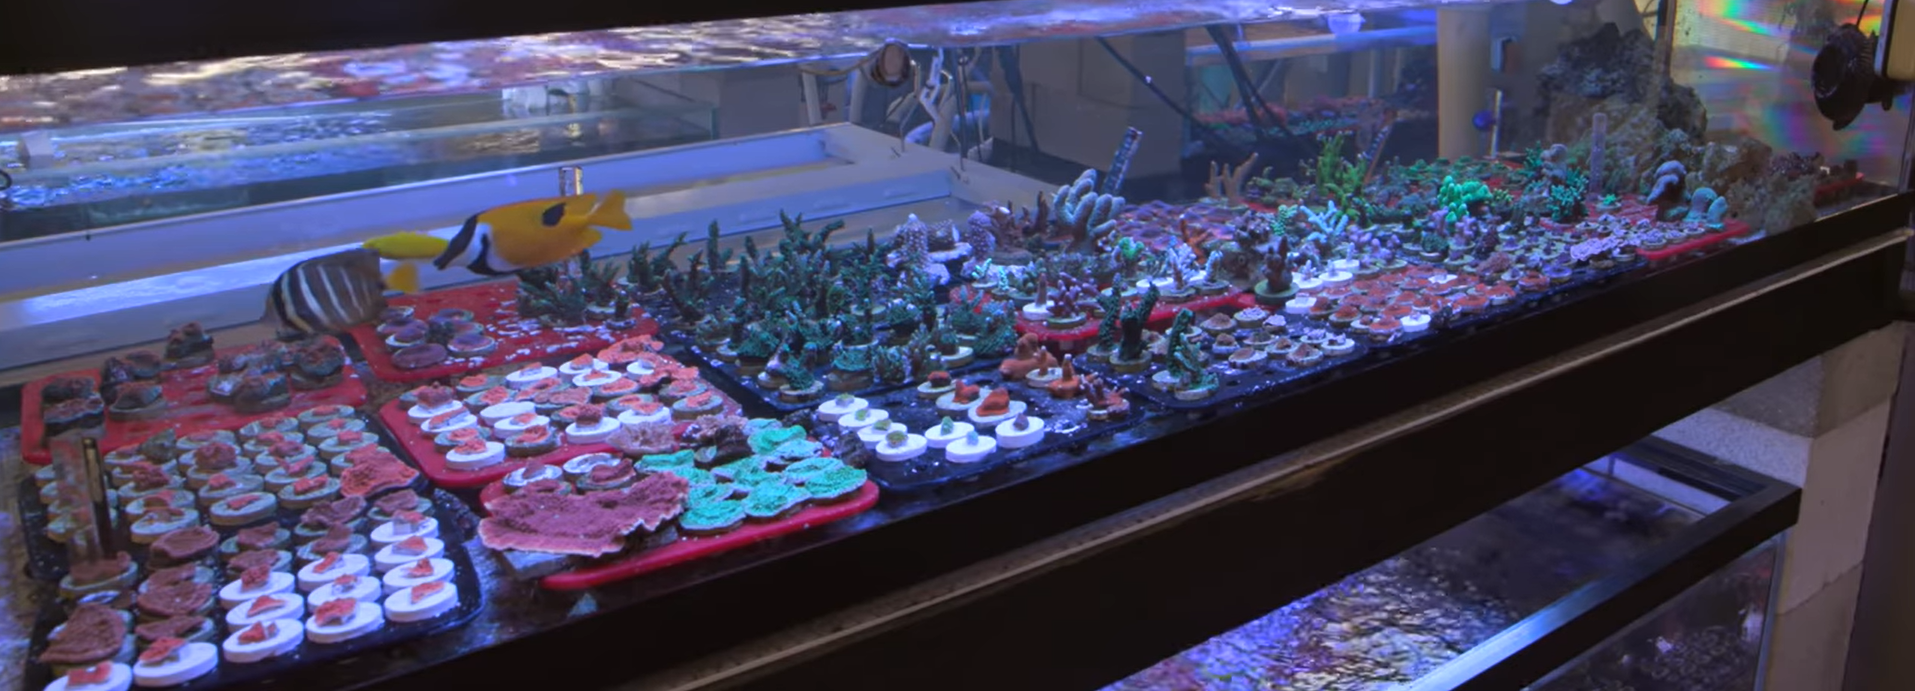 May 2020 Coral Farm Update